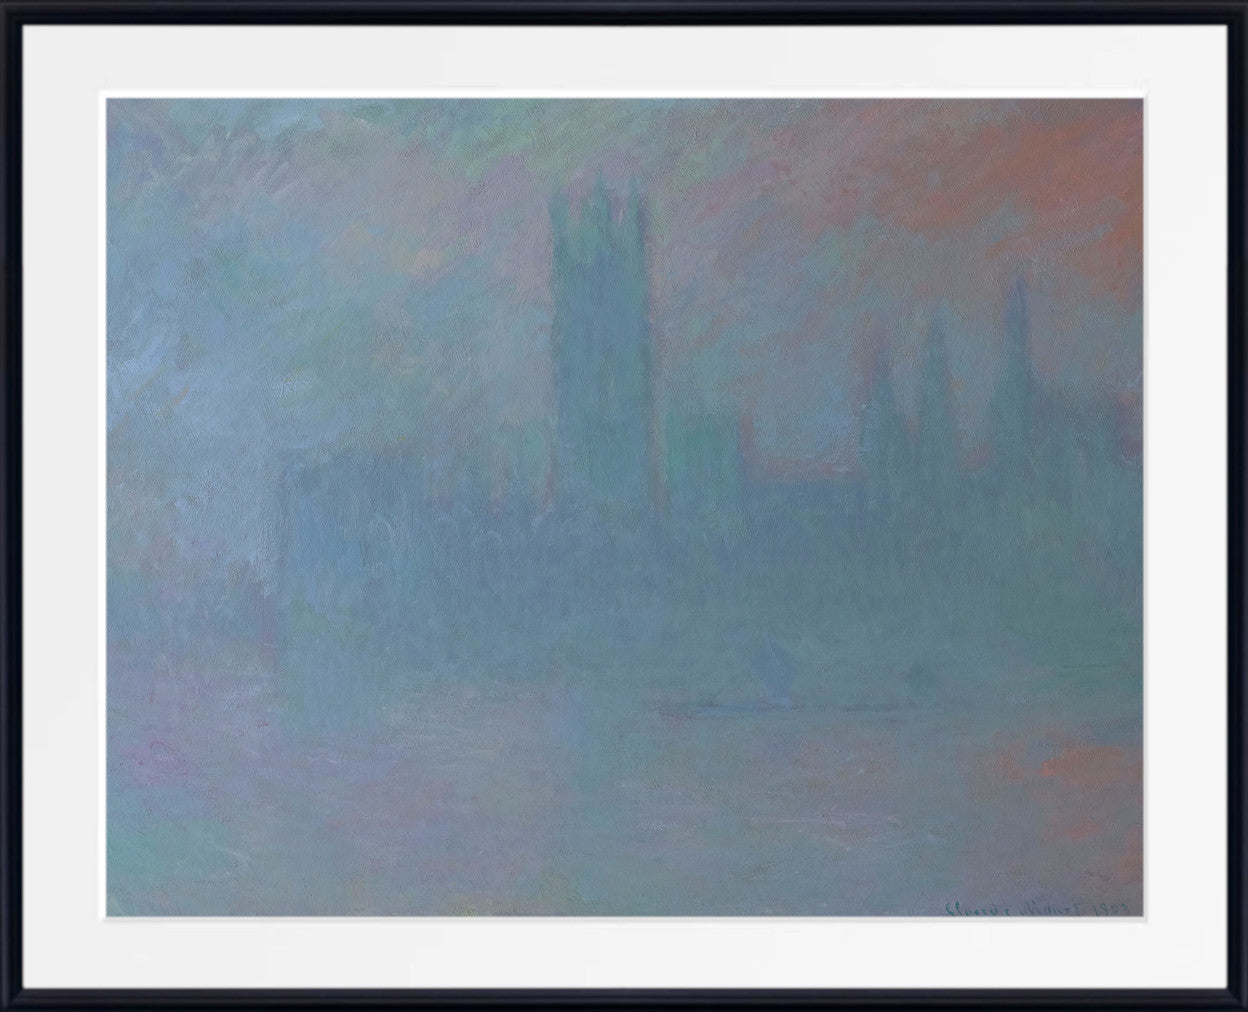 Houses of Parliament in the Fog by Claude Monet